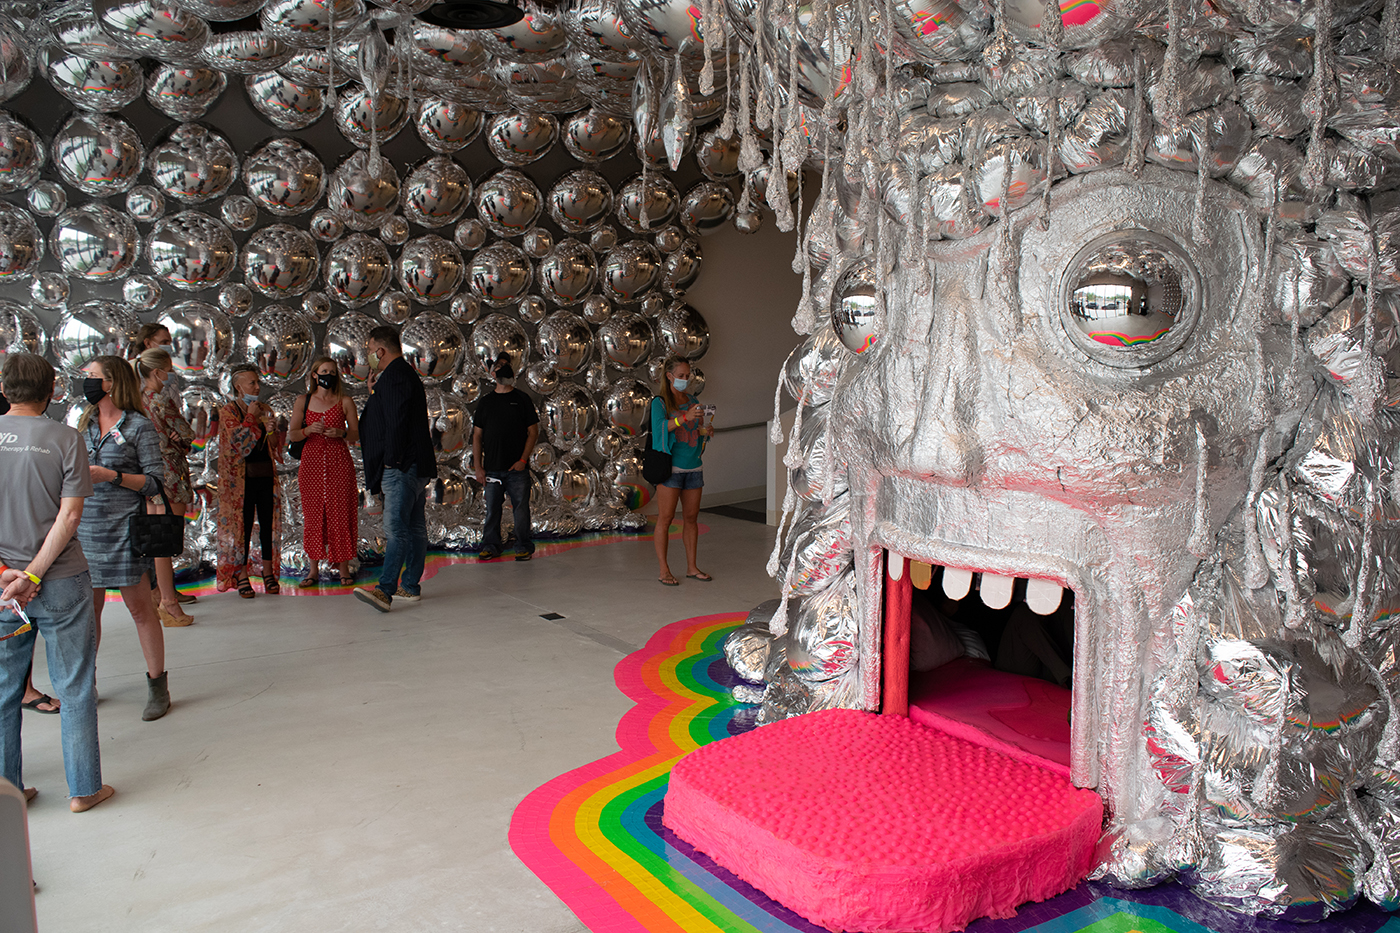 The King’s Mouth is a hands-on exhibit in which participants climb into the art piece itself to explore a sensory light show.